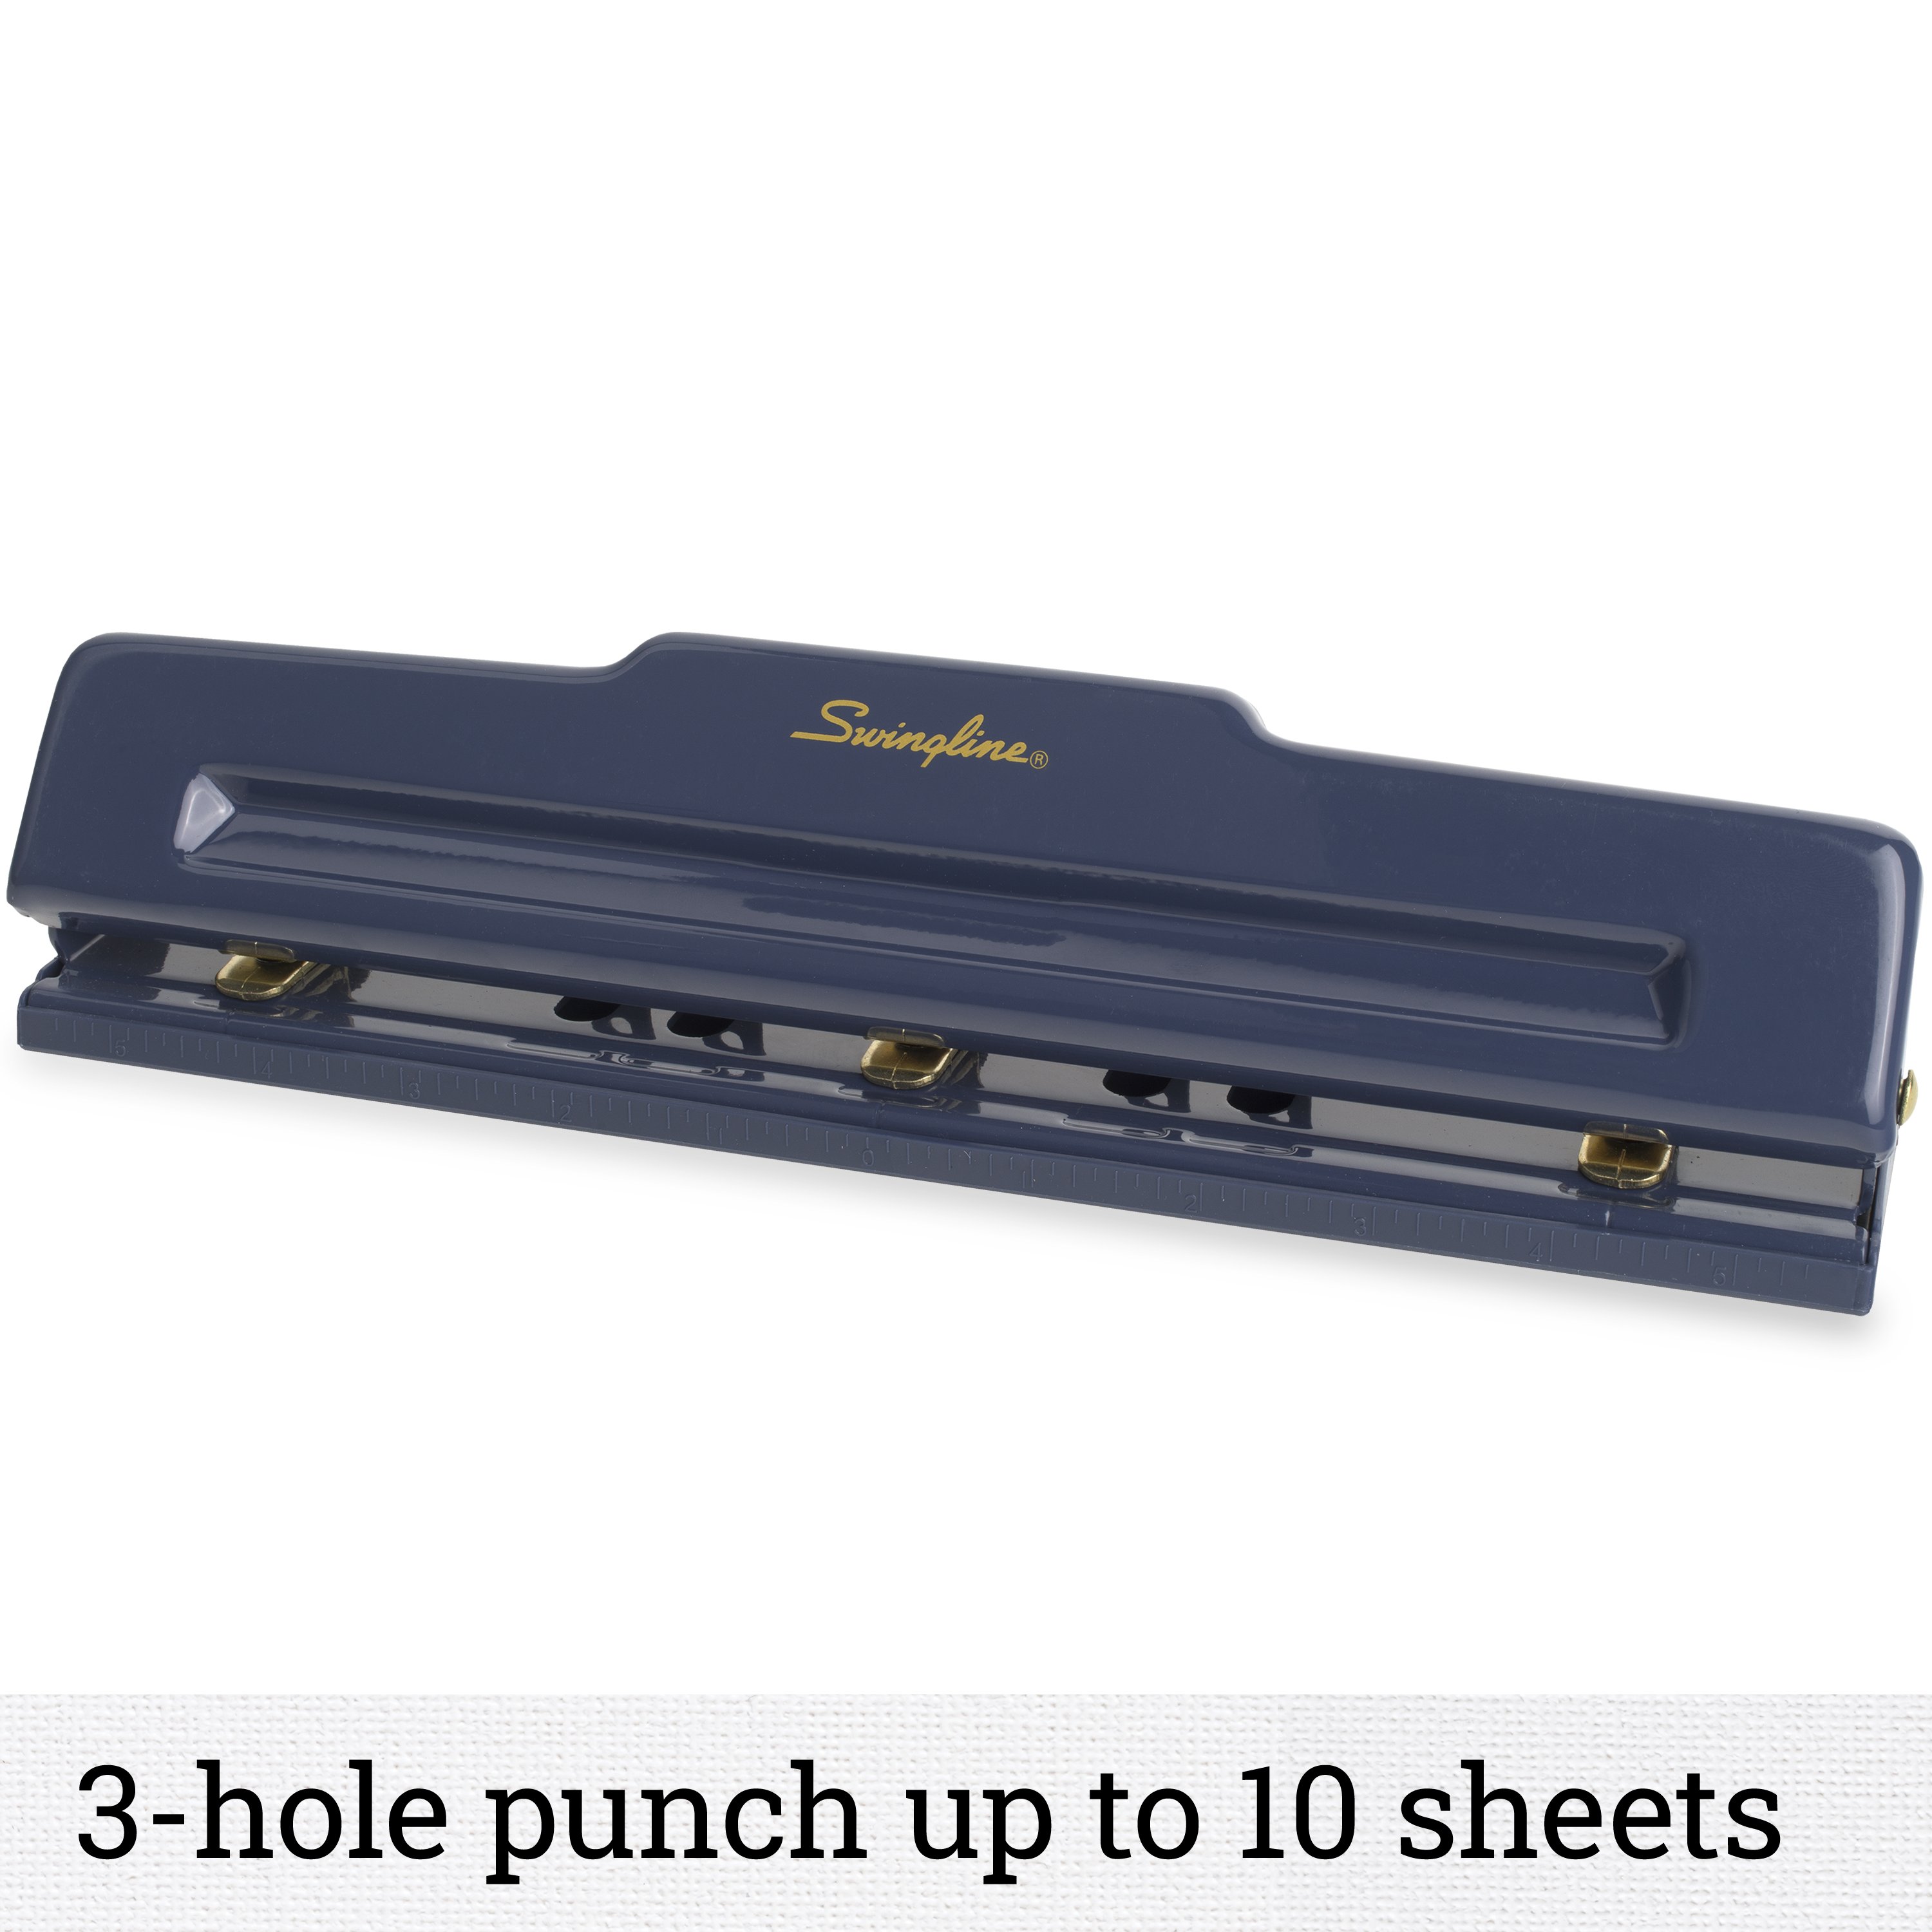 Swingline 444 Stapler Punch Kit, Navy and Gold (S7044405-WMT) - image 5 of 9